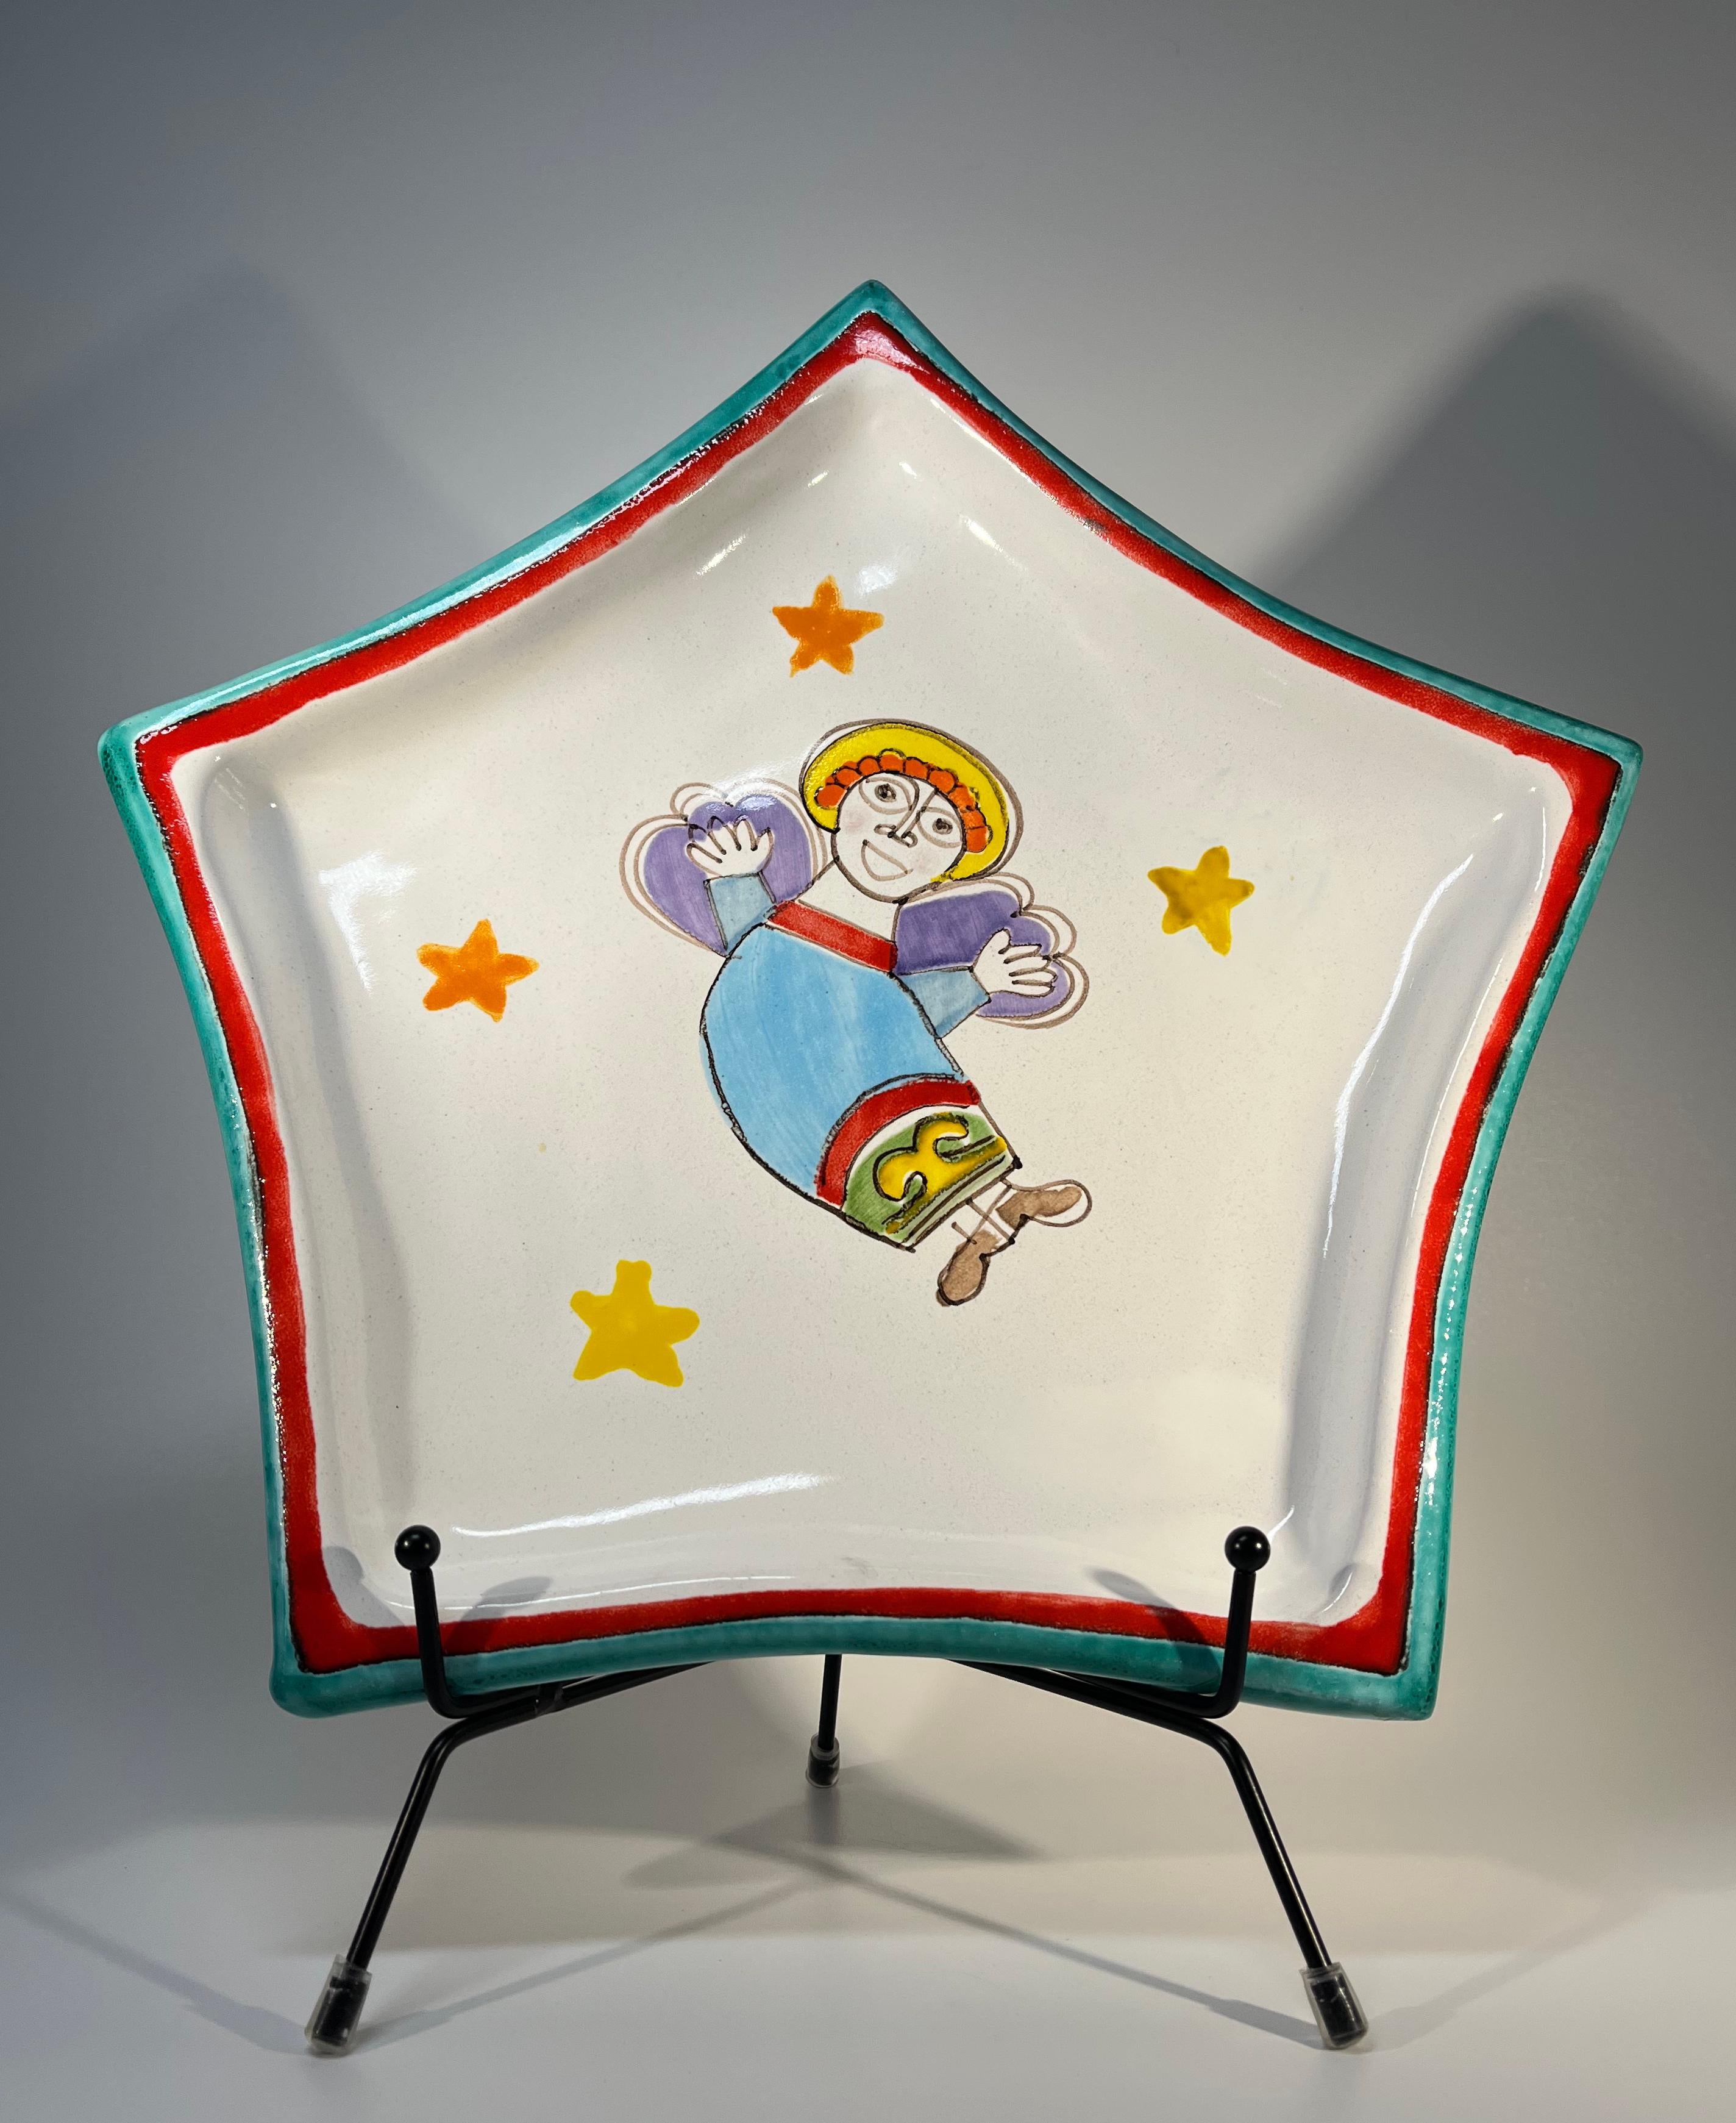 Star shaped ceramic hand painted platter by DeSimone, Italy
A glorious and uplifting hand painted angel flies amongst stars on this joyous piece
Circa 1960's
Signed DeSimone, Italy. Original De Sanctis, Roma, label
Height 1.25 inch, Width 11.5 inch,